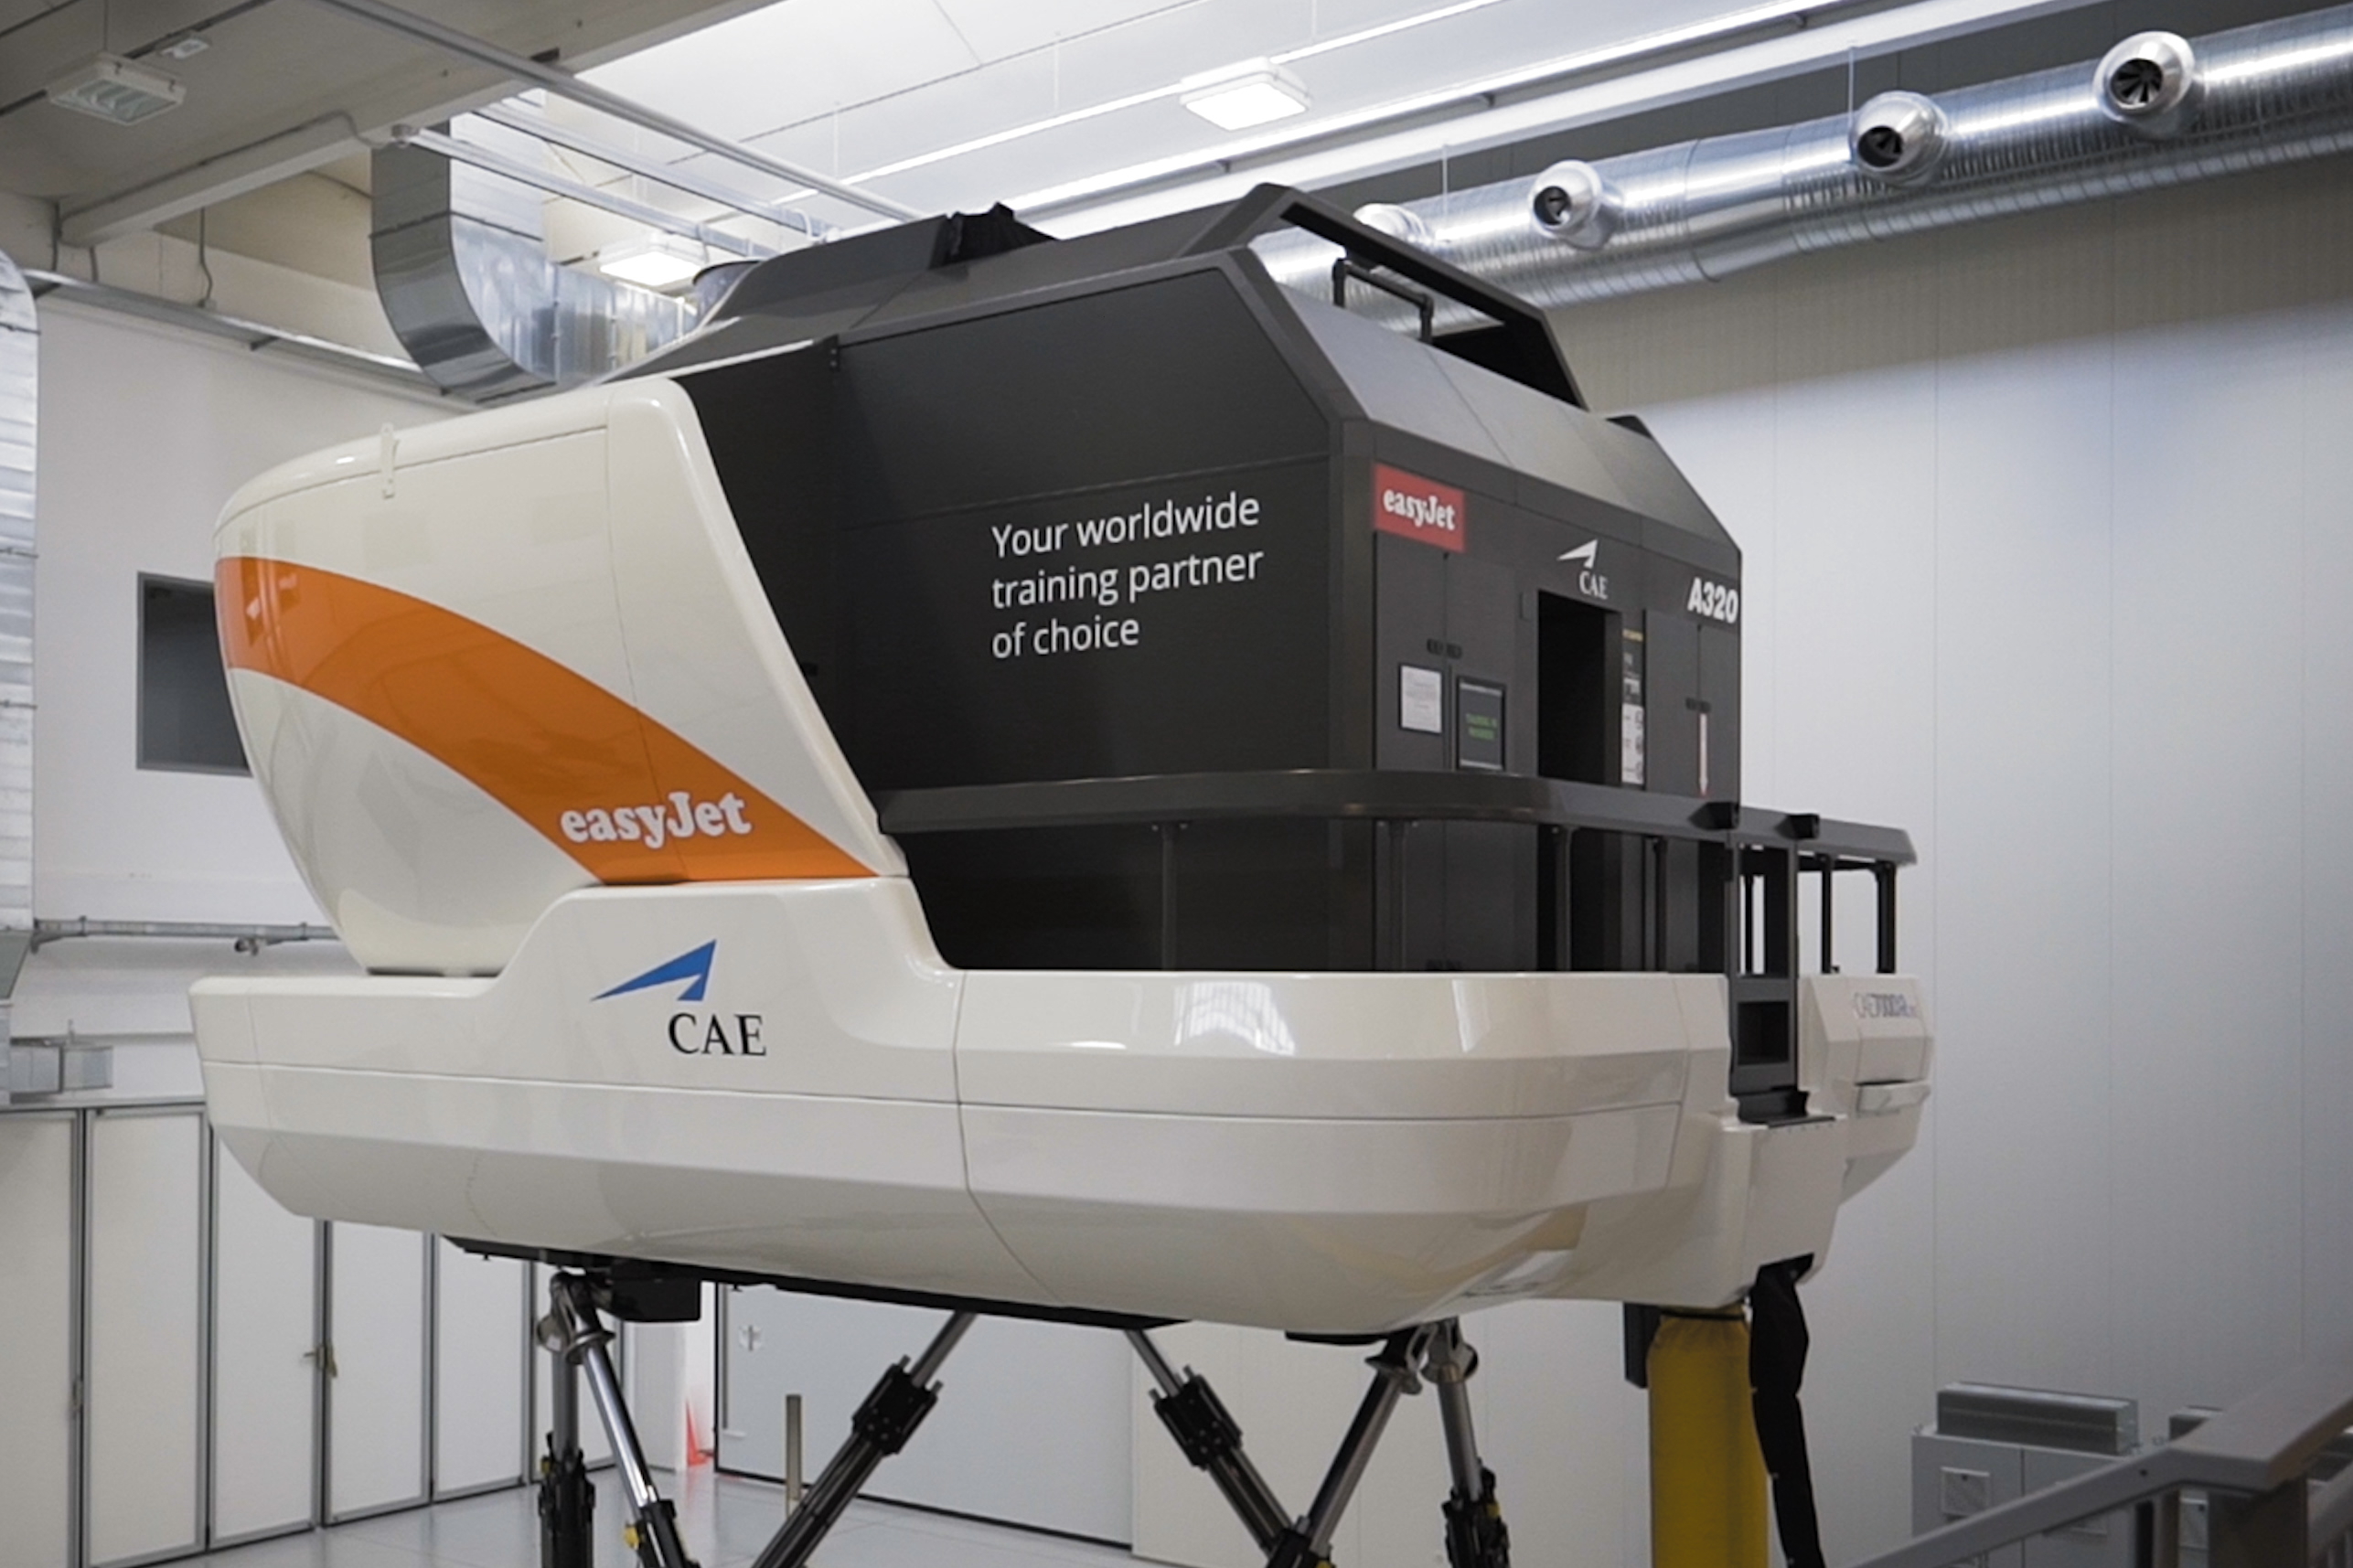 CAE and easyJet have opened a training centre near Milan Malpensa airport in Lombardy, Italy.  After London Gatwick and Manchester, this is the third new training centre that CAE has inaugurated in the last month to support the pilot training needs of easyJet across Europe. Click to enlarge.